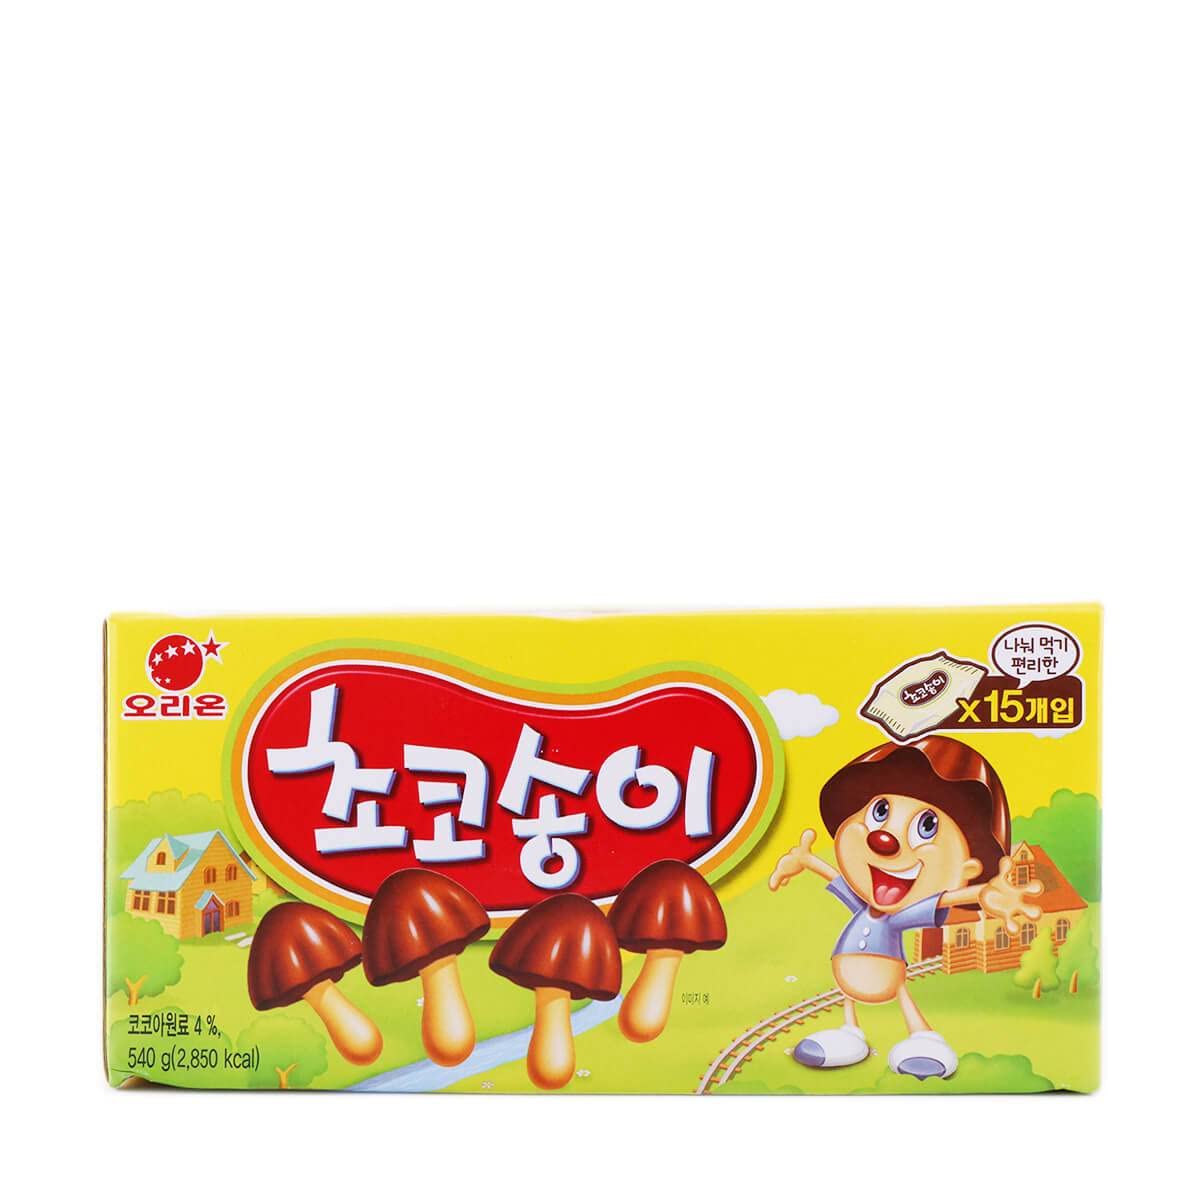 Orion Chocoboy Chocolate with Mini Biscuit 36g x 15 / Total 540g